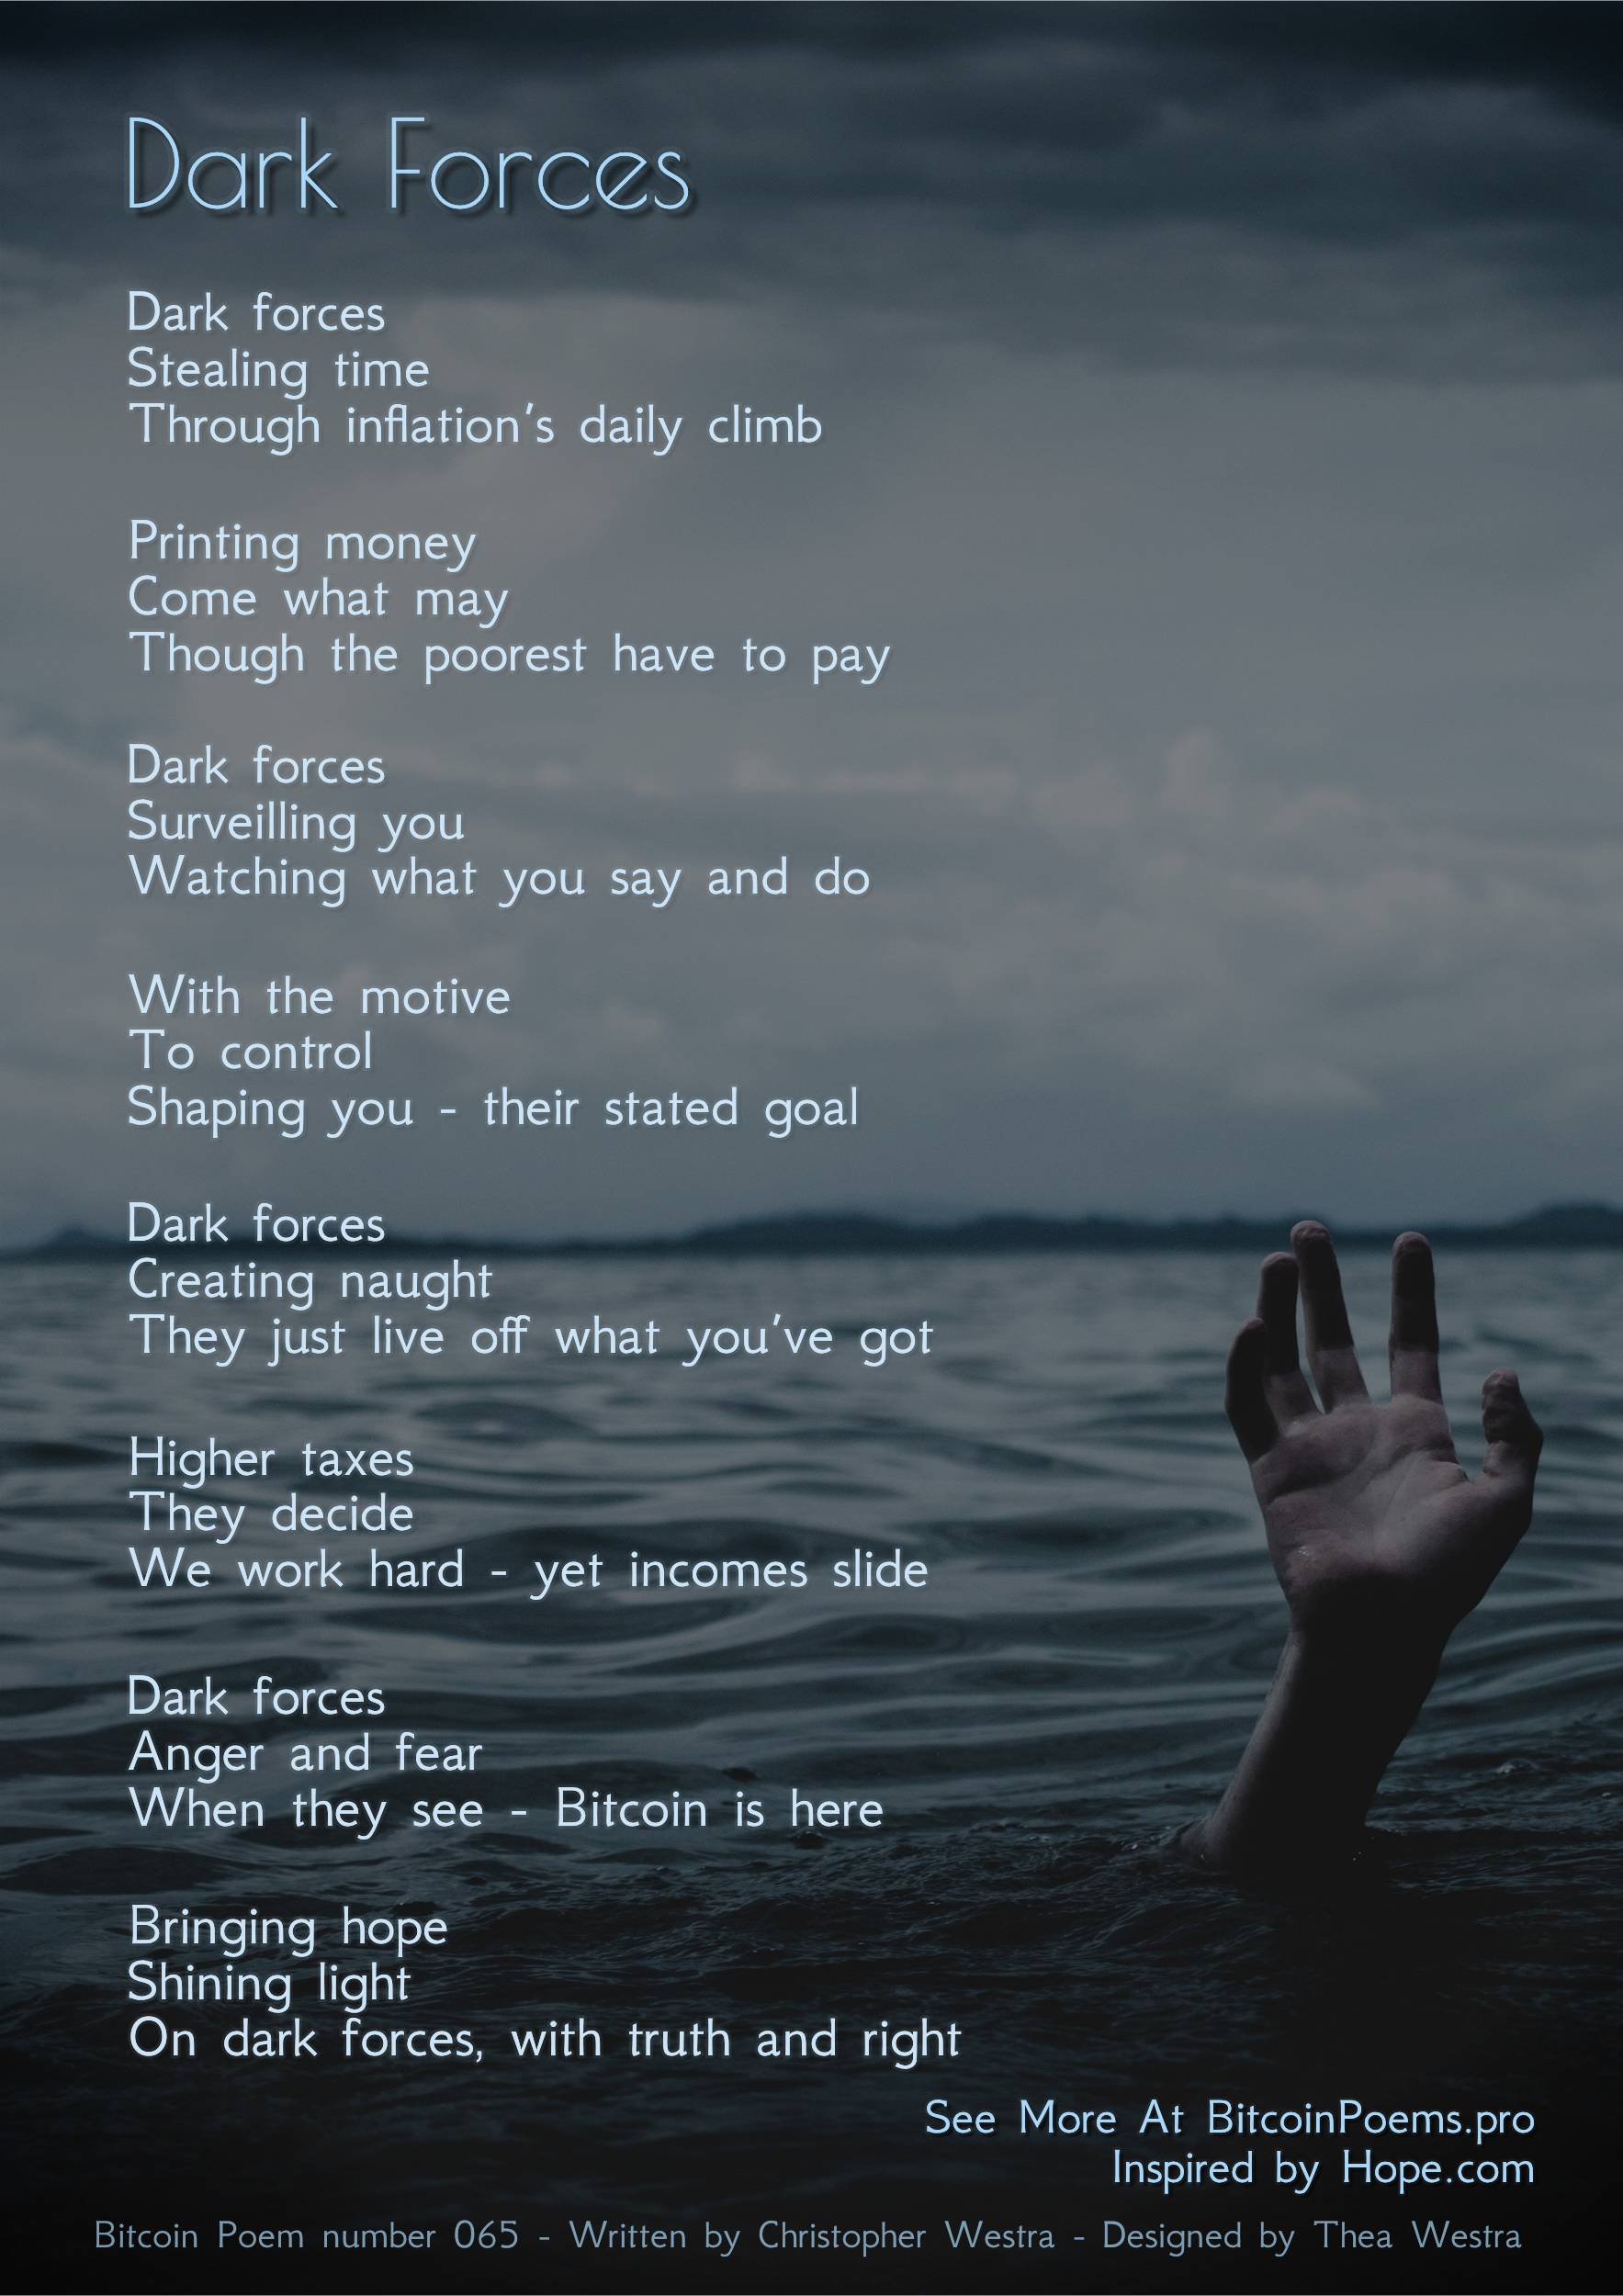 Dark Forces - Bitcoin Poem 065 by Christopher Westra